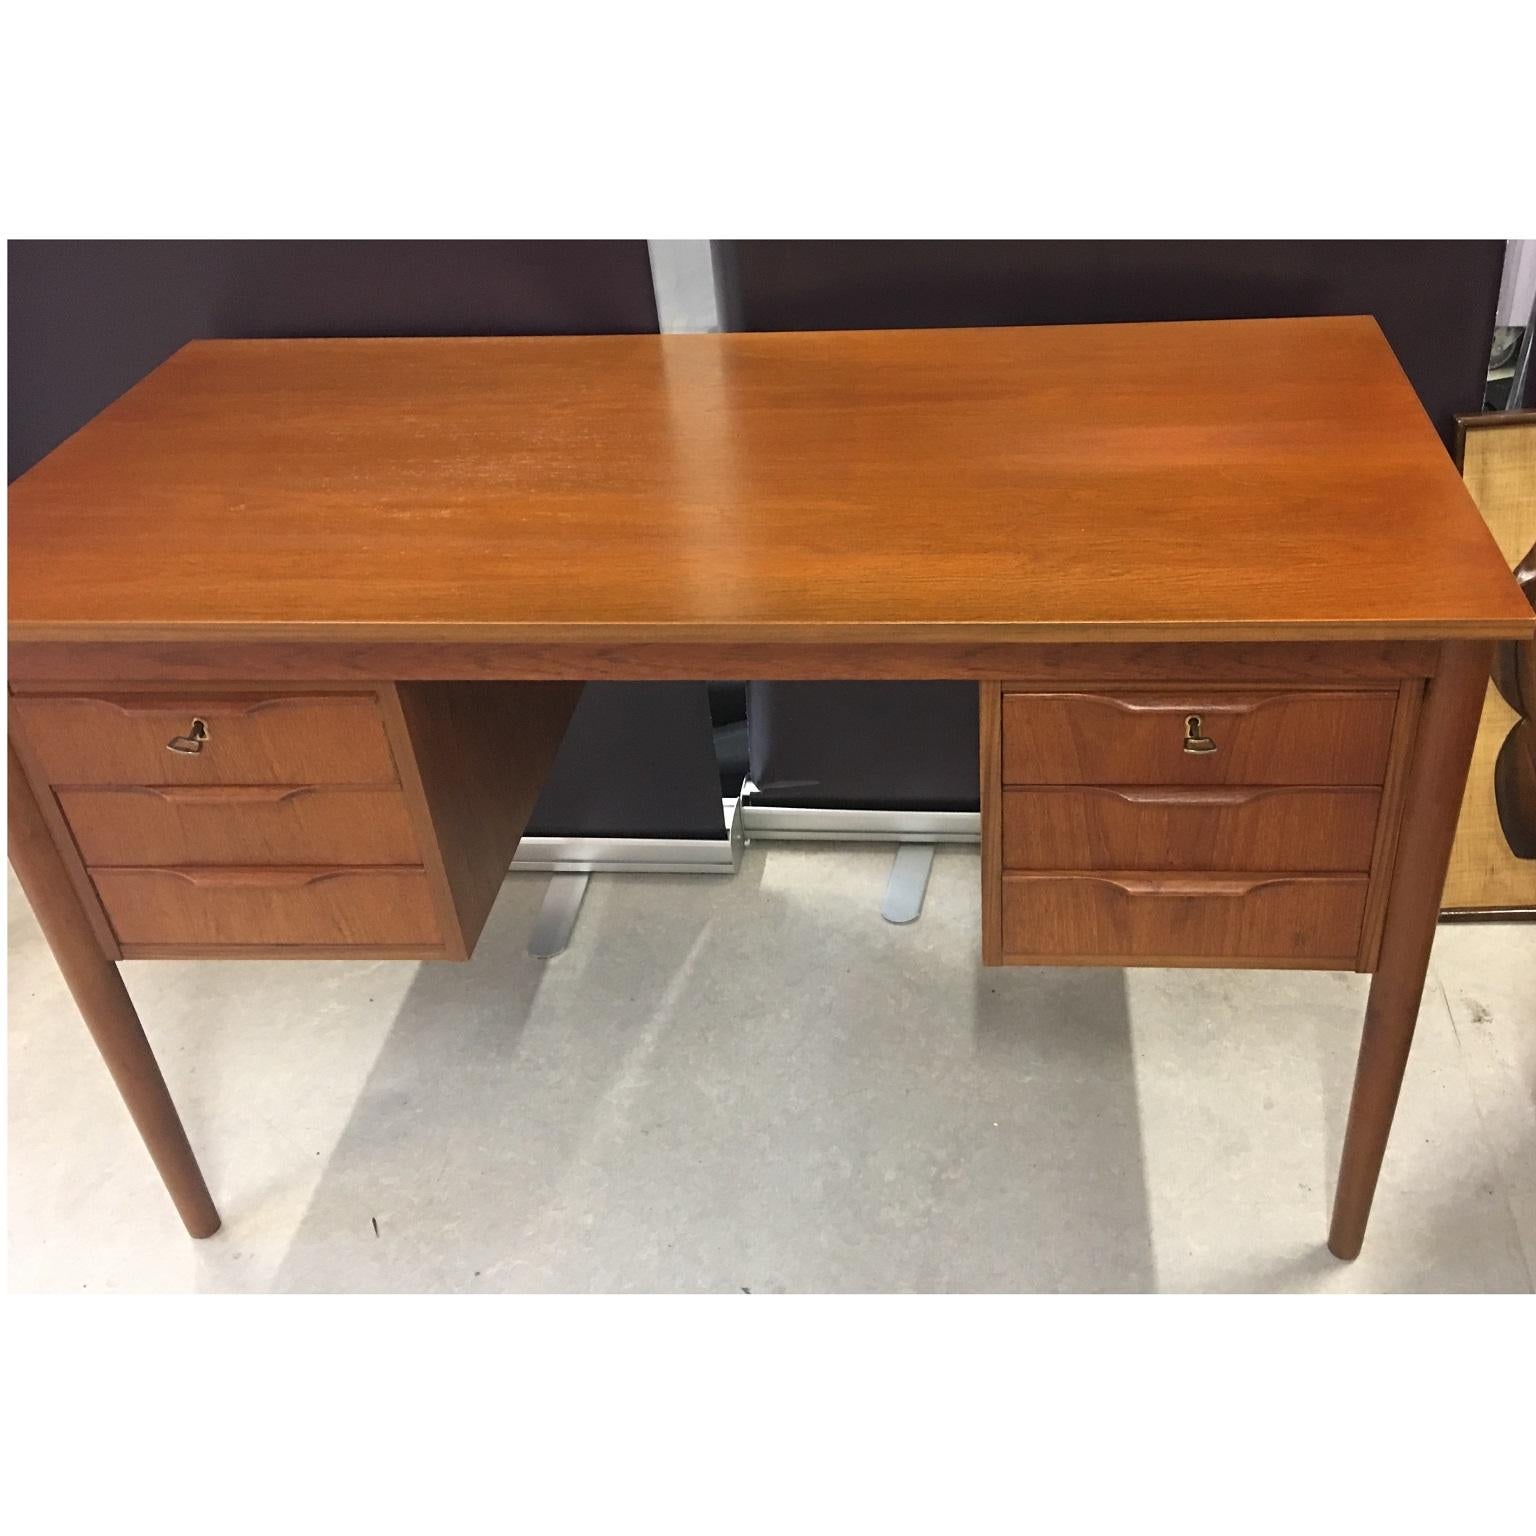 Danish midcentury teak writing desk with six drawers, circa 1960s.

A Danish midcentury teak writing desk with 6 drawers, the top one on both sides are lockable with a key. Tactile drawer handles that protrude slightly. Four main legs taper